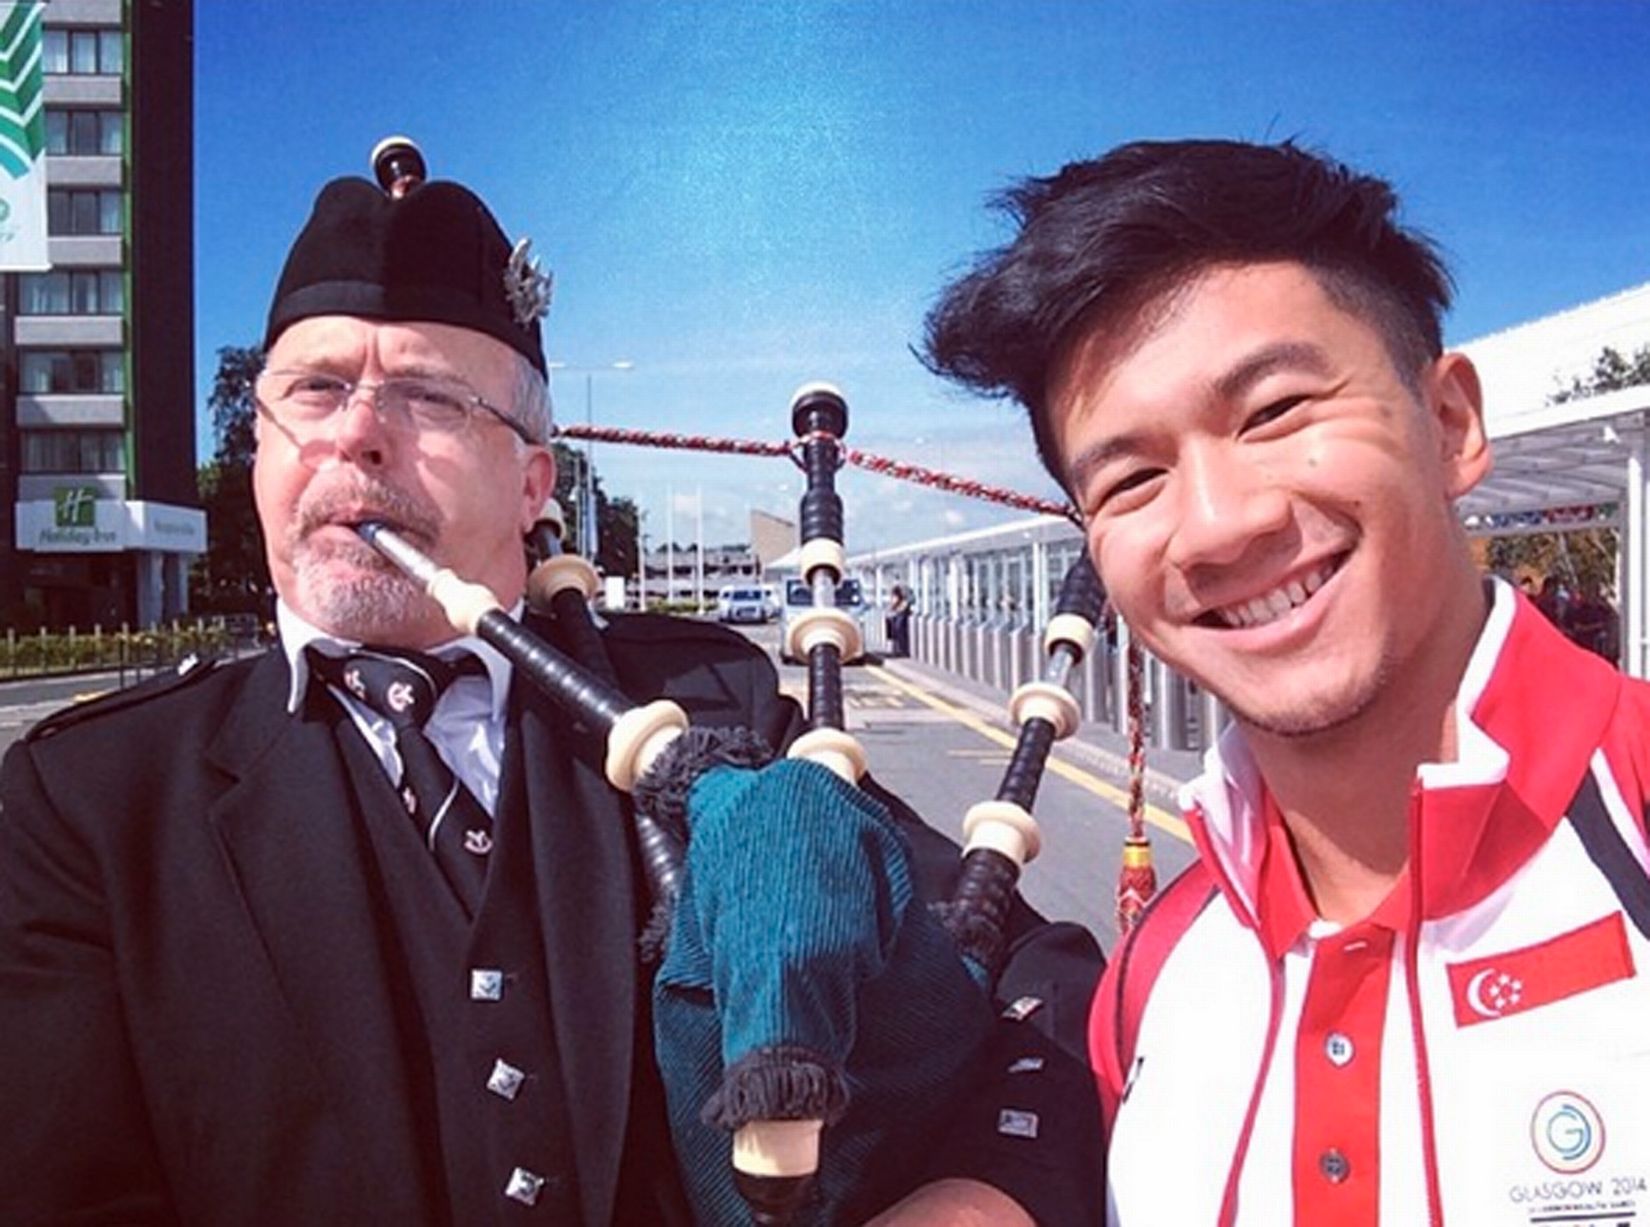 Singapore sprinter Calvin Kang gets up close and personal with a piper ©Twitter